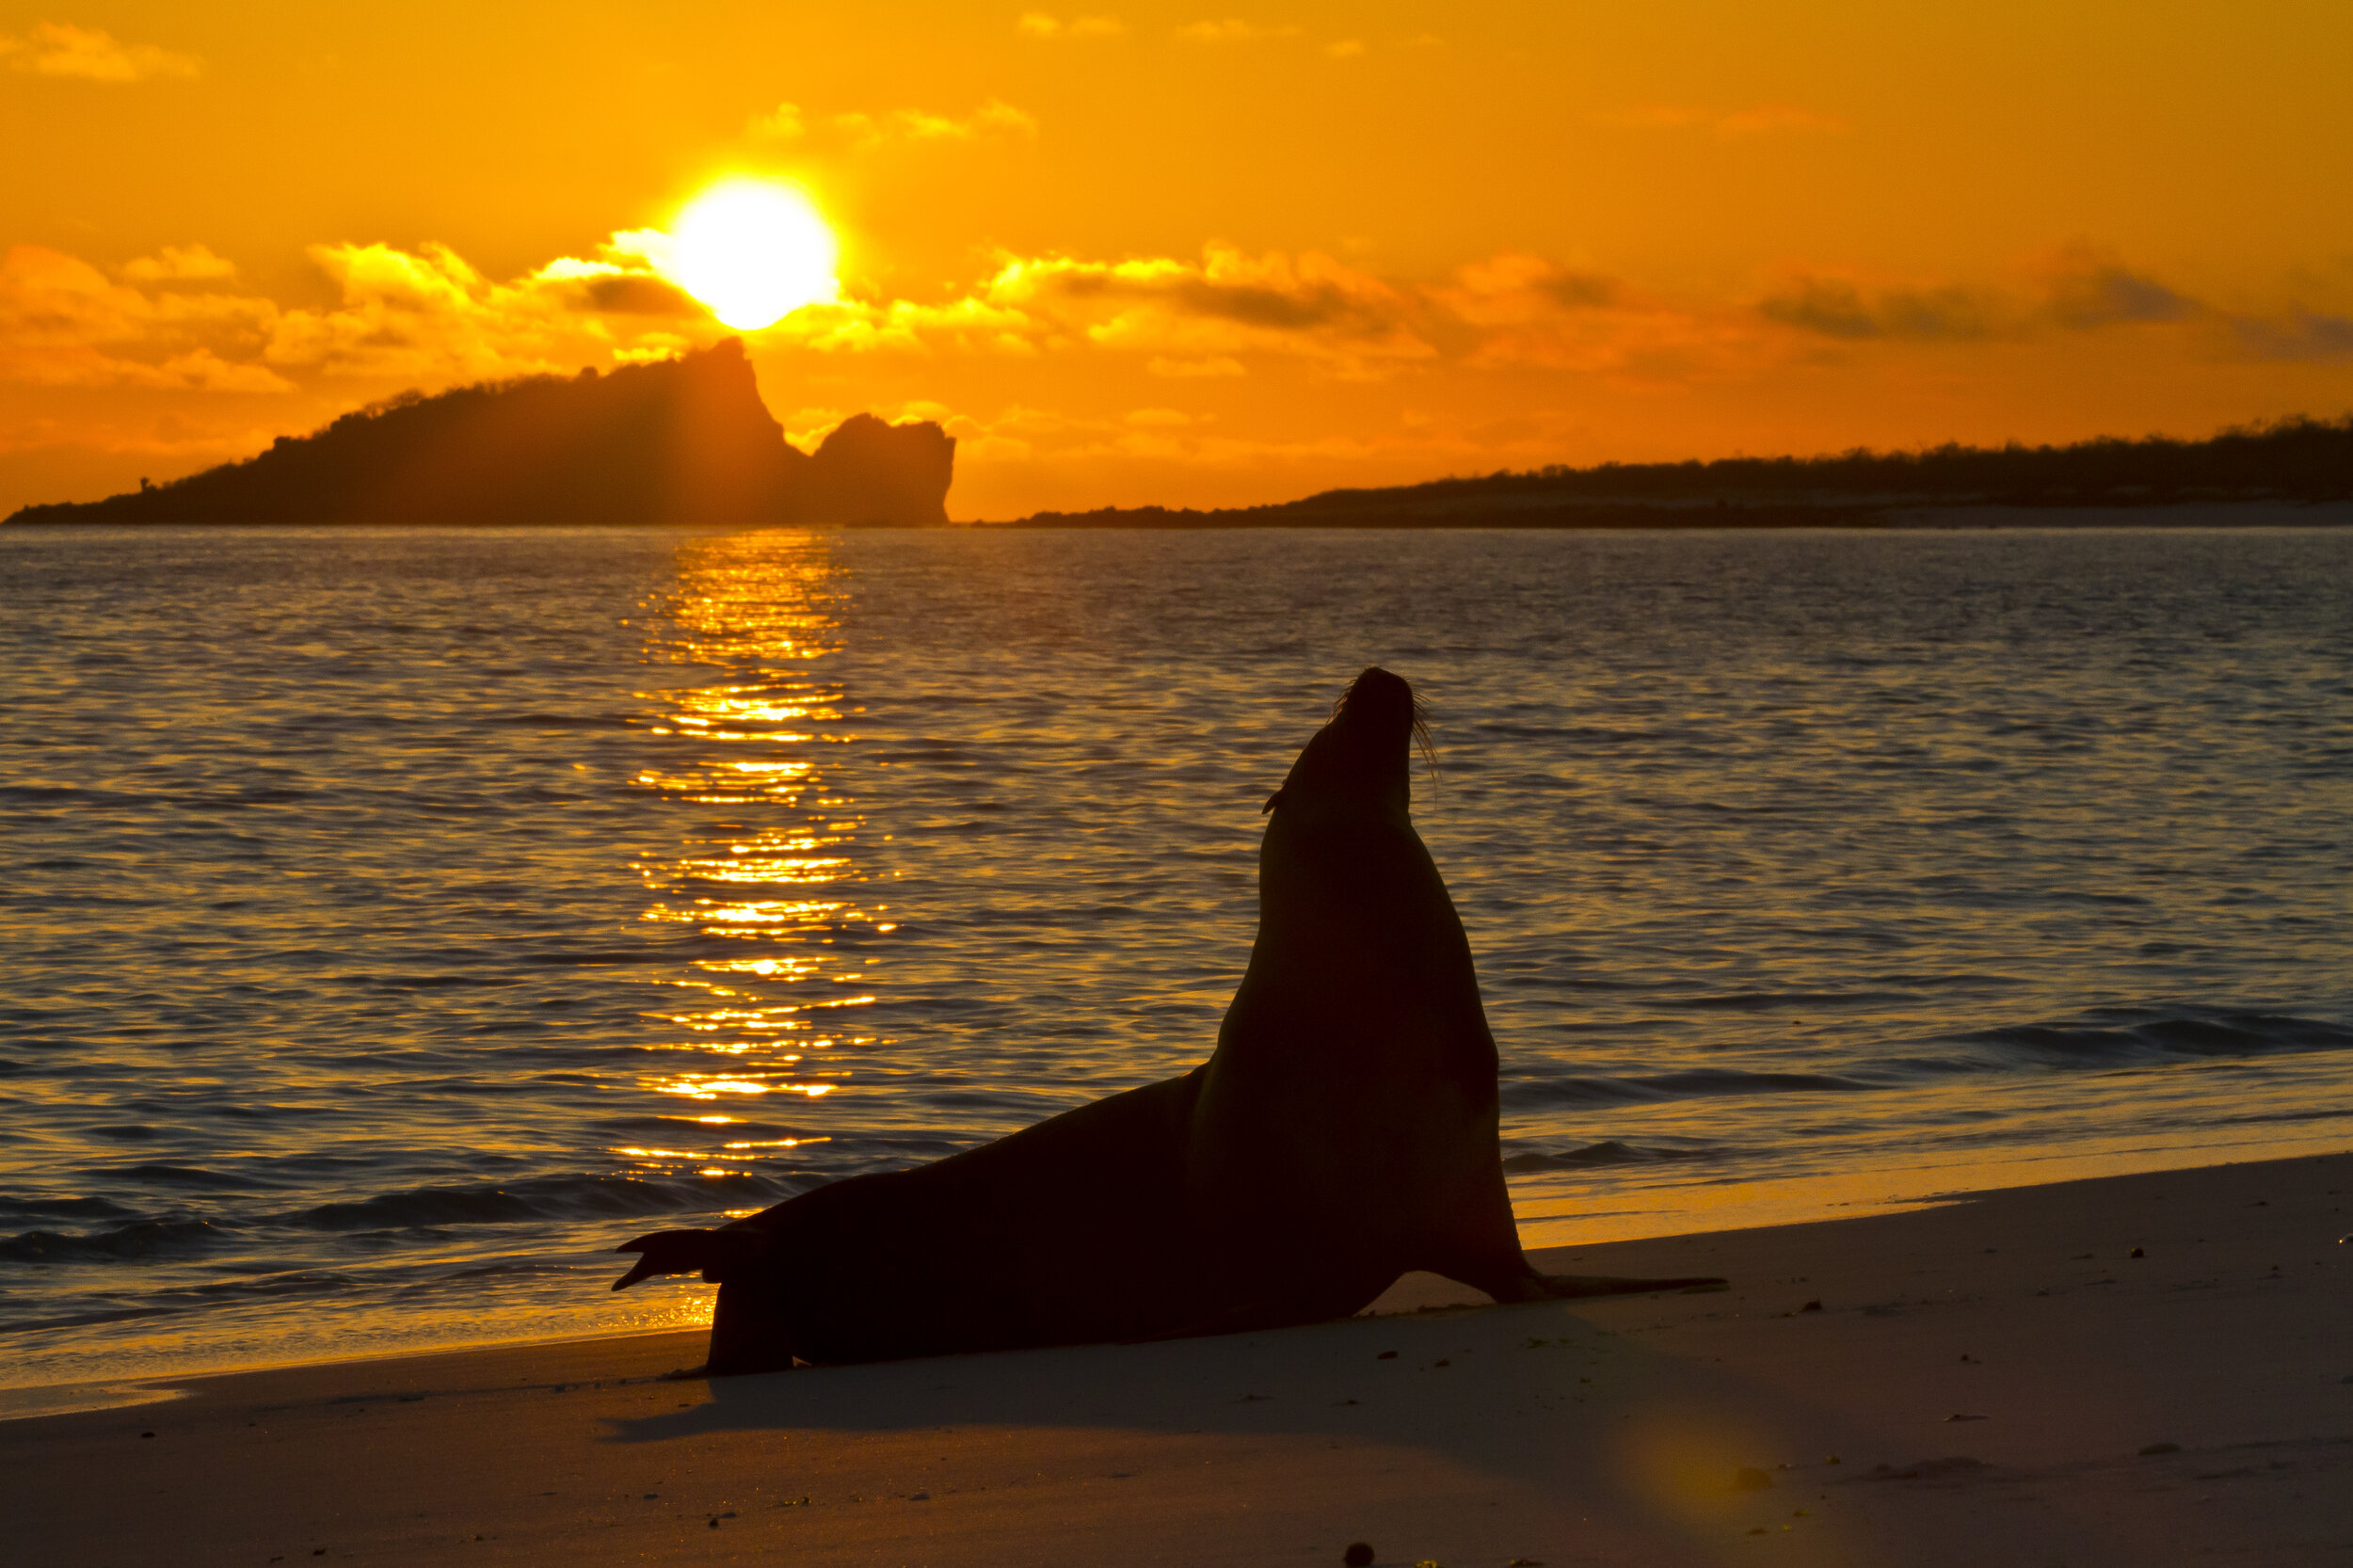   A very dapper sea lion modeling in the sunset on Santiago Island (photo credit: Lindblad Expeditions)  